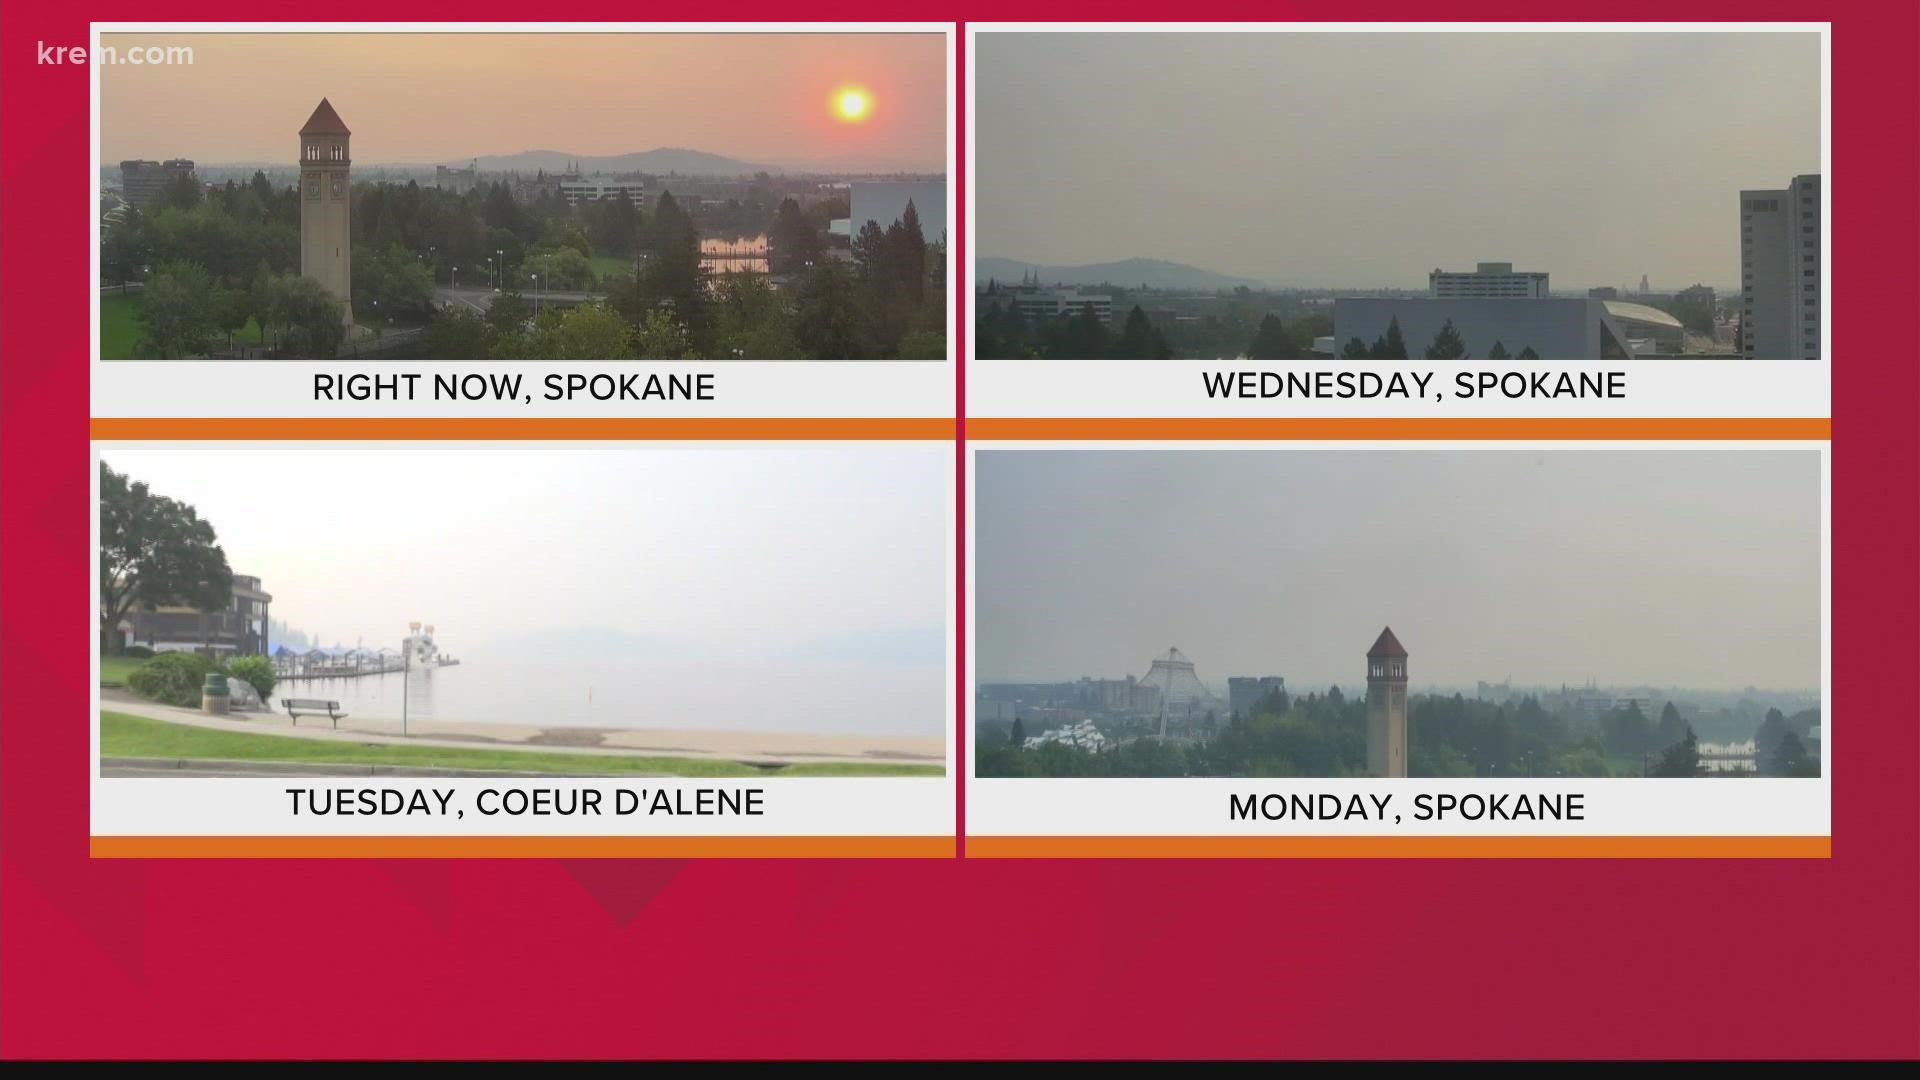 Air quality has been 'unhealthy' to 'moderate' this week, experts share the best ways to stay safe.